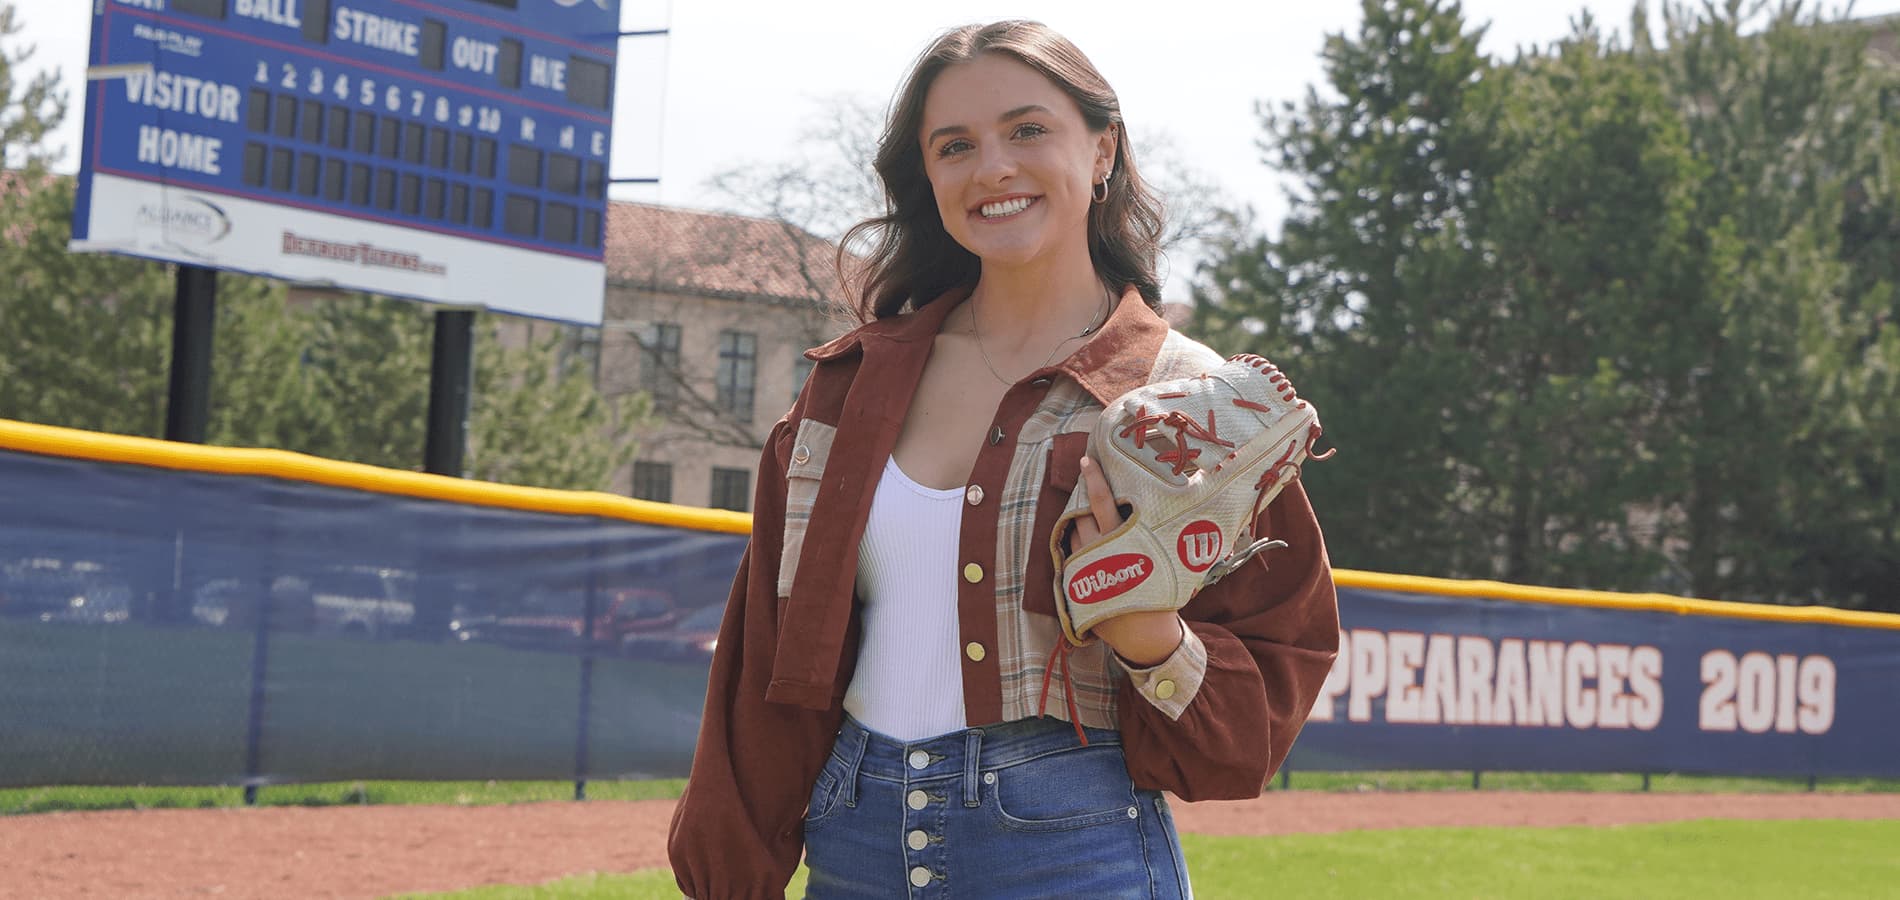 Kara Wolfbauer stands on the Buysse Ballpark field in front of a scoreboard, trees and McNichols Campus buildings on a sunny day.